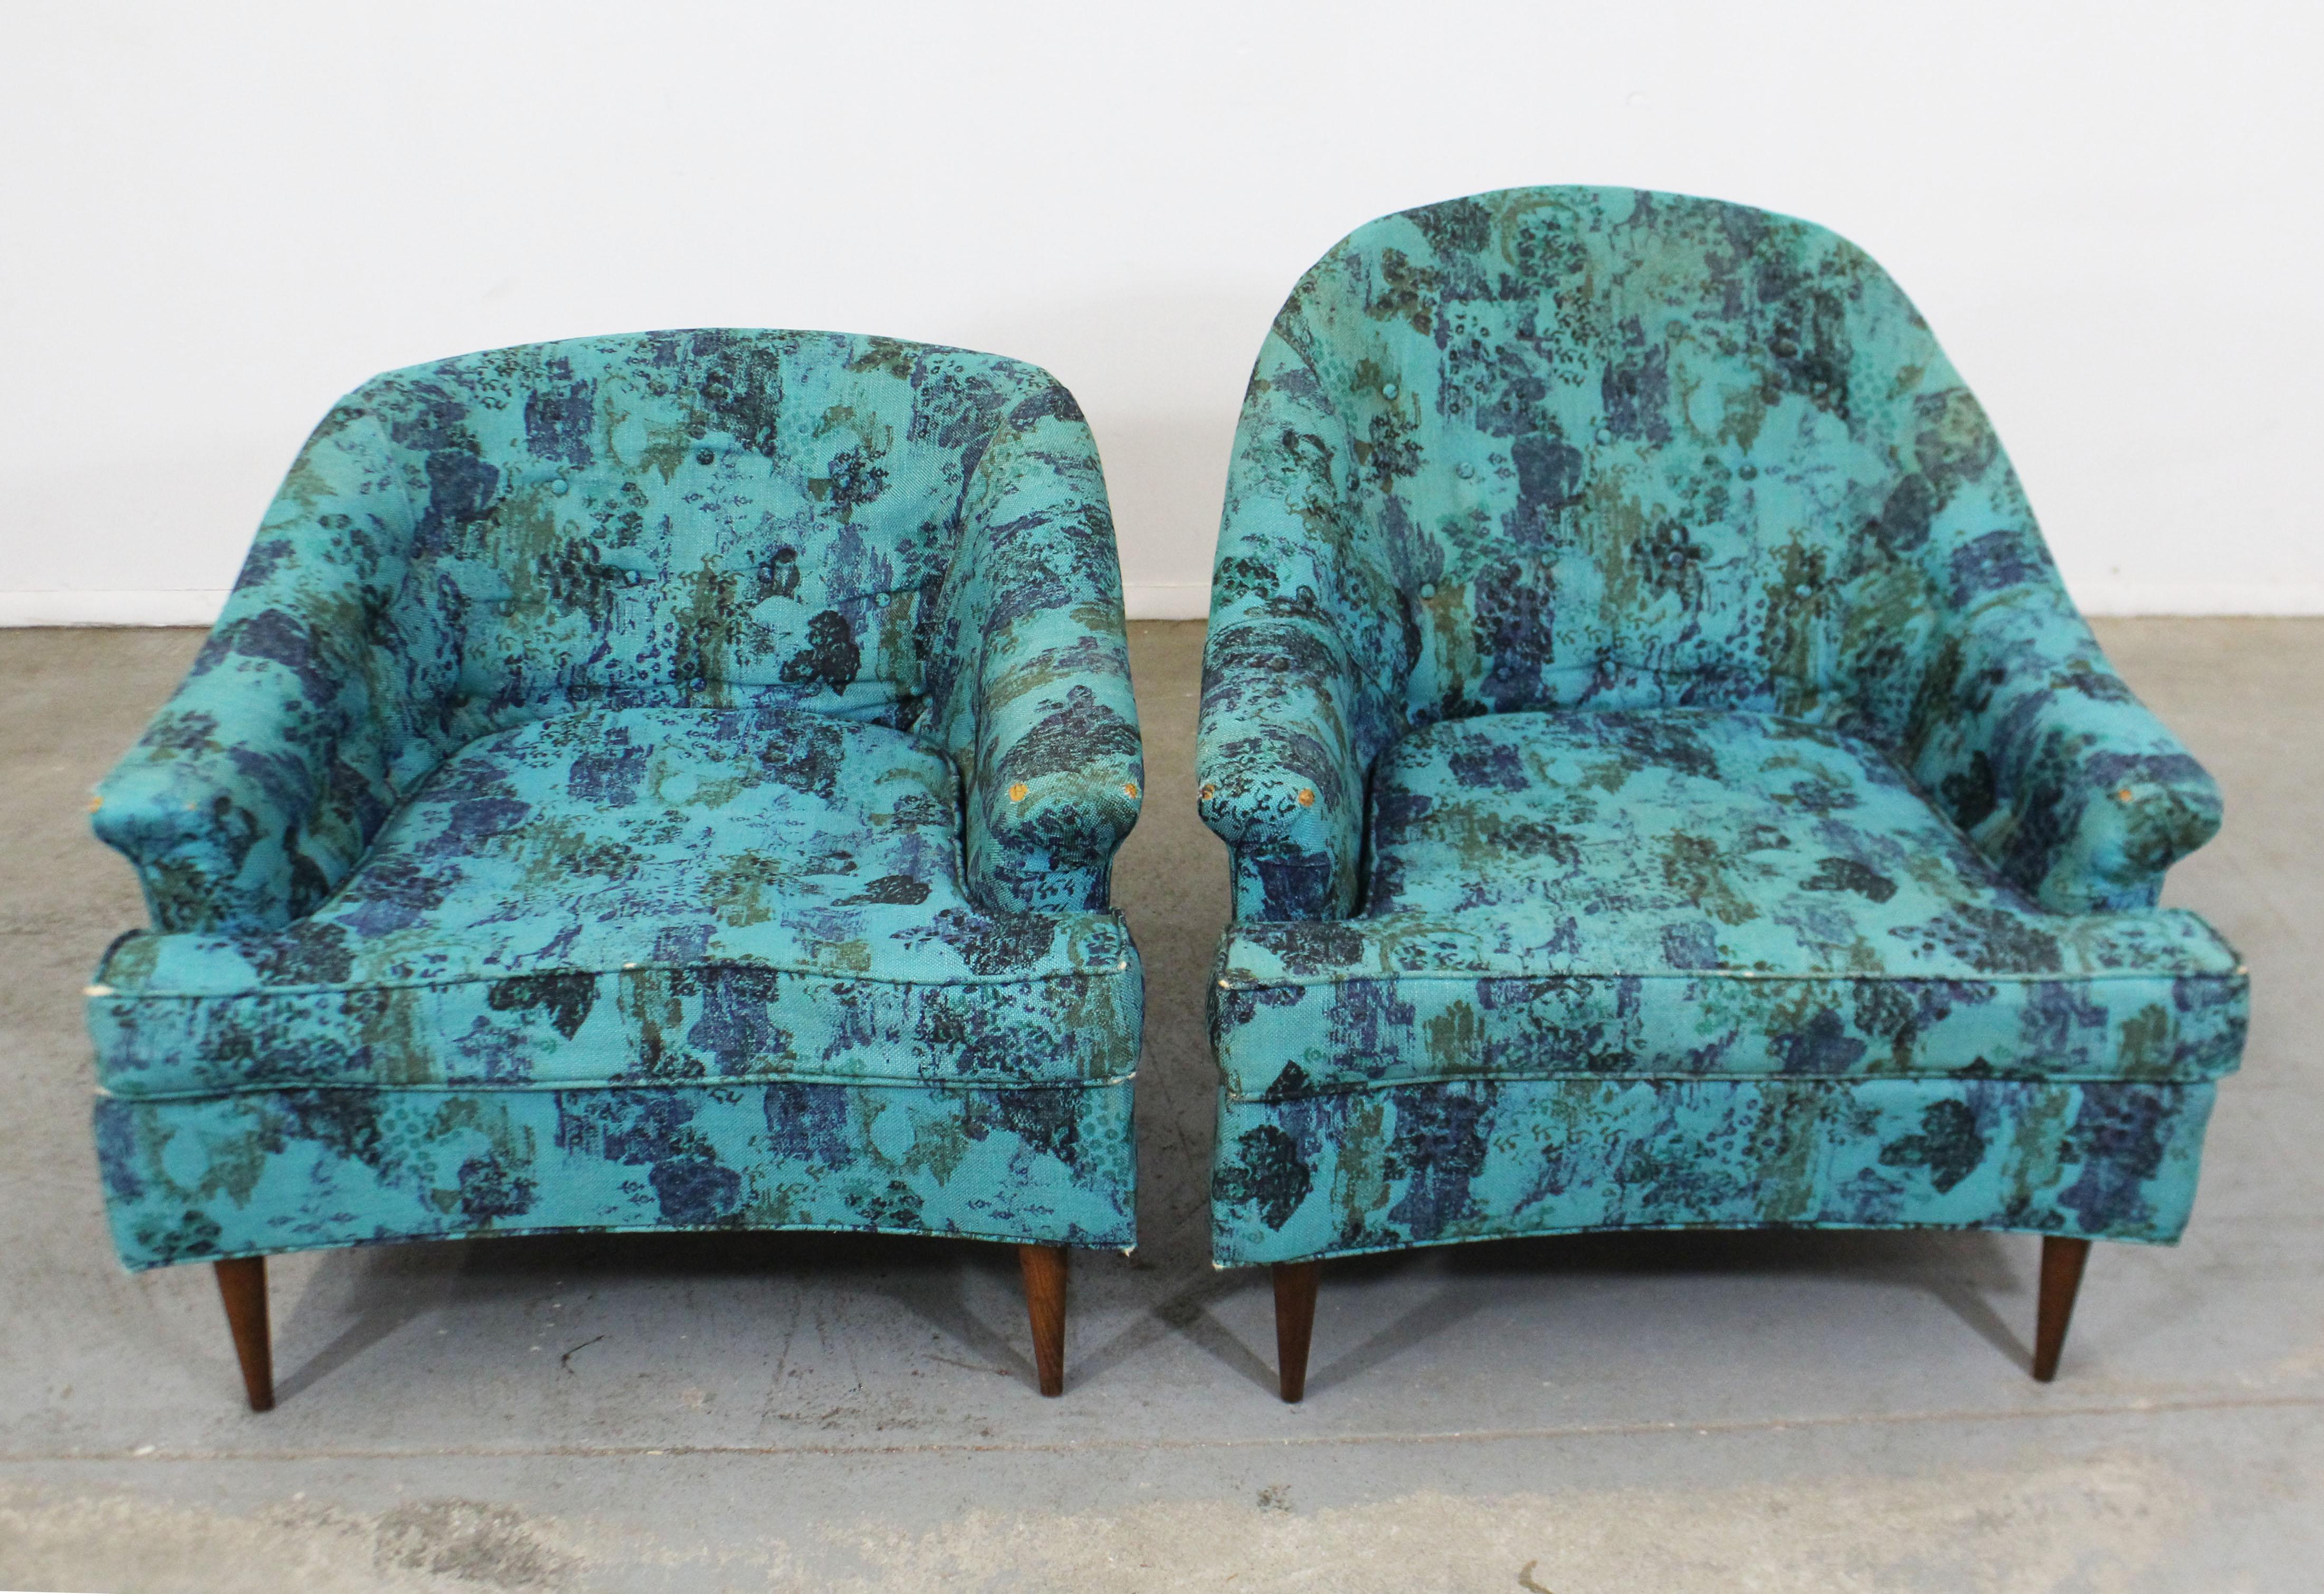 Offered is a pair of vintage Mid-Century Modern lounge chairs made by Prestige. Absolutely incredible lines on these chairs. Features original tufted backs and removable seat cushions. They are in structurally sound condition and need to be